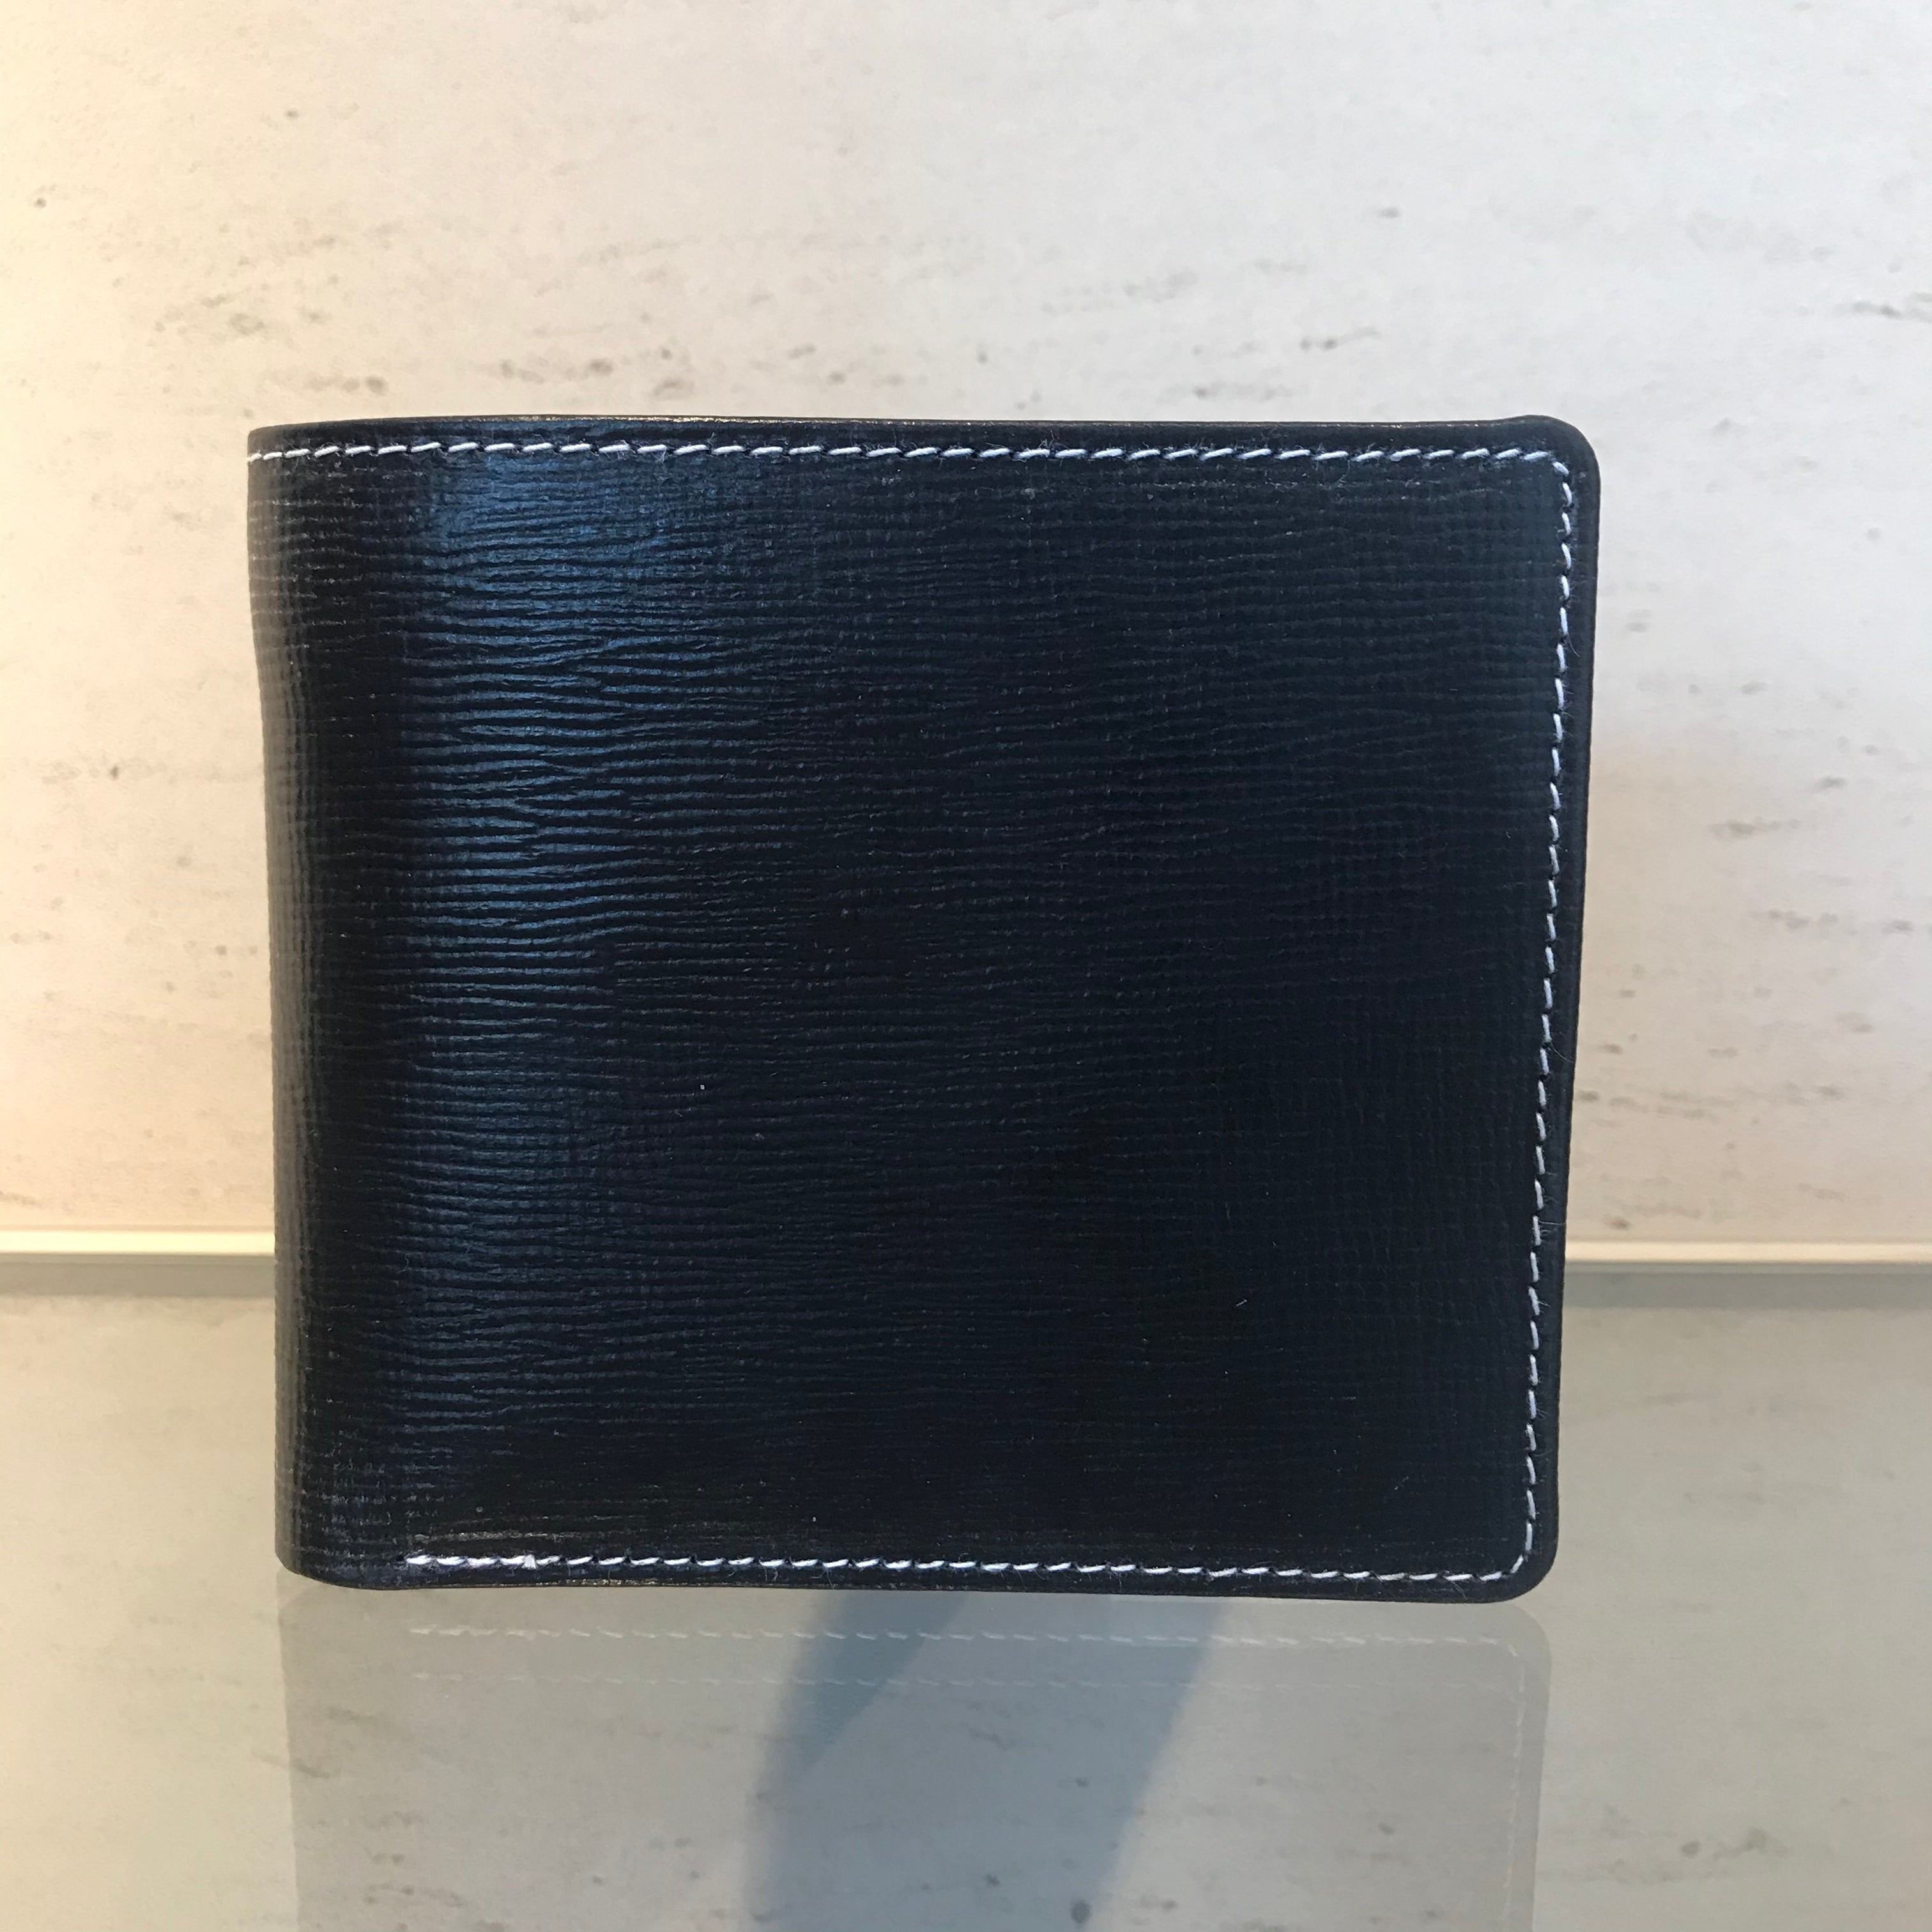 Whitehouse Cox ホワイトハウスコックス S7532 NOTECASE WITH COIN CASE  二つ折り財布 REGENT BRIDLE